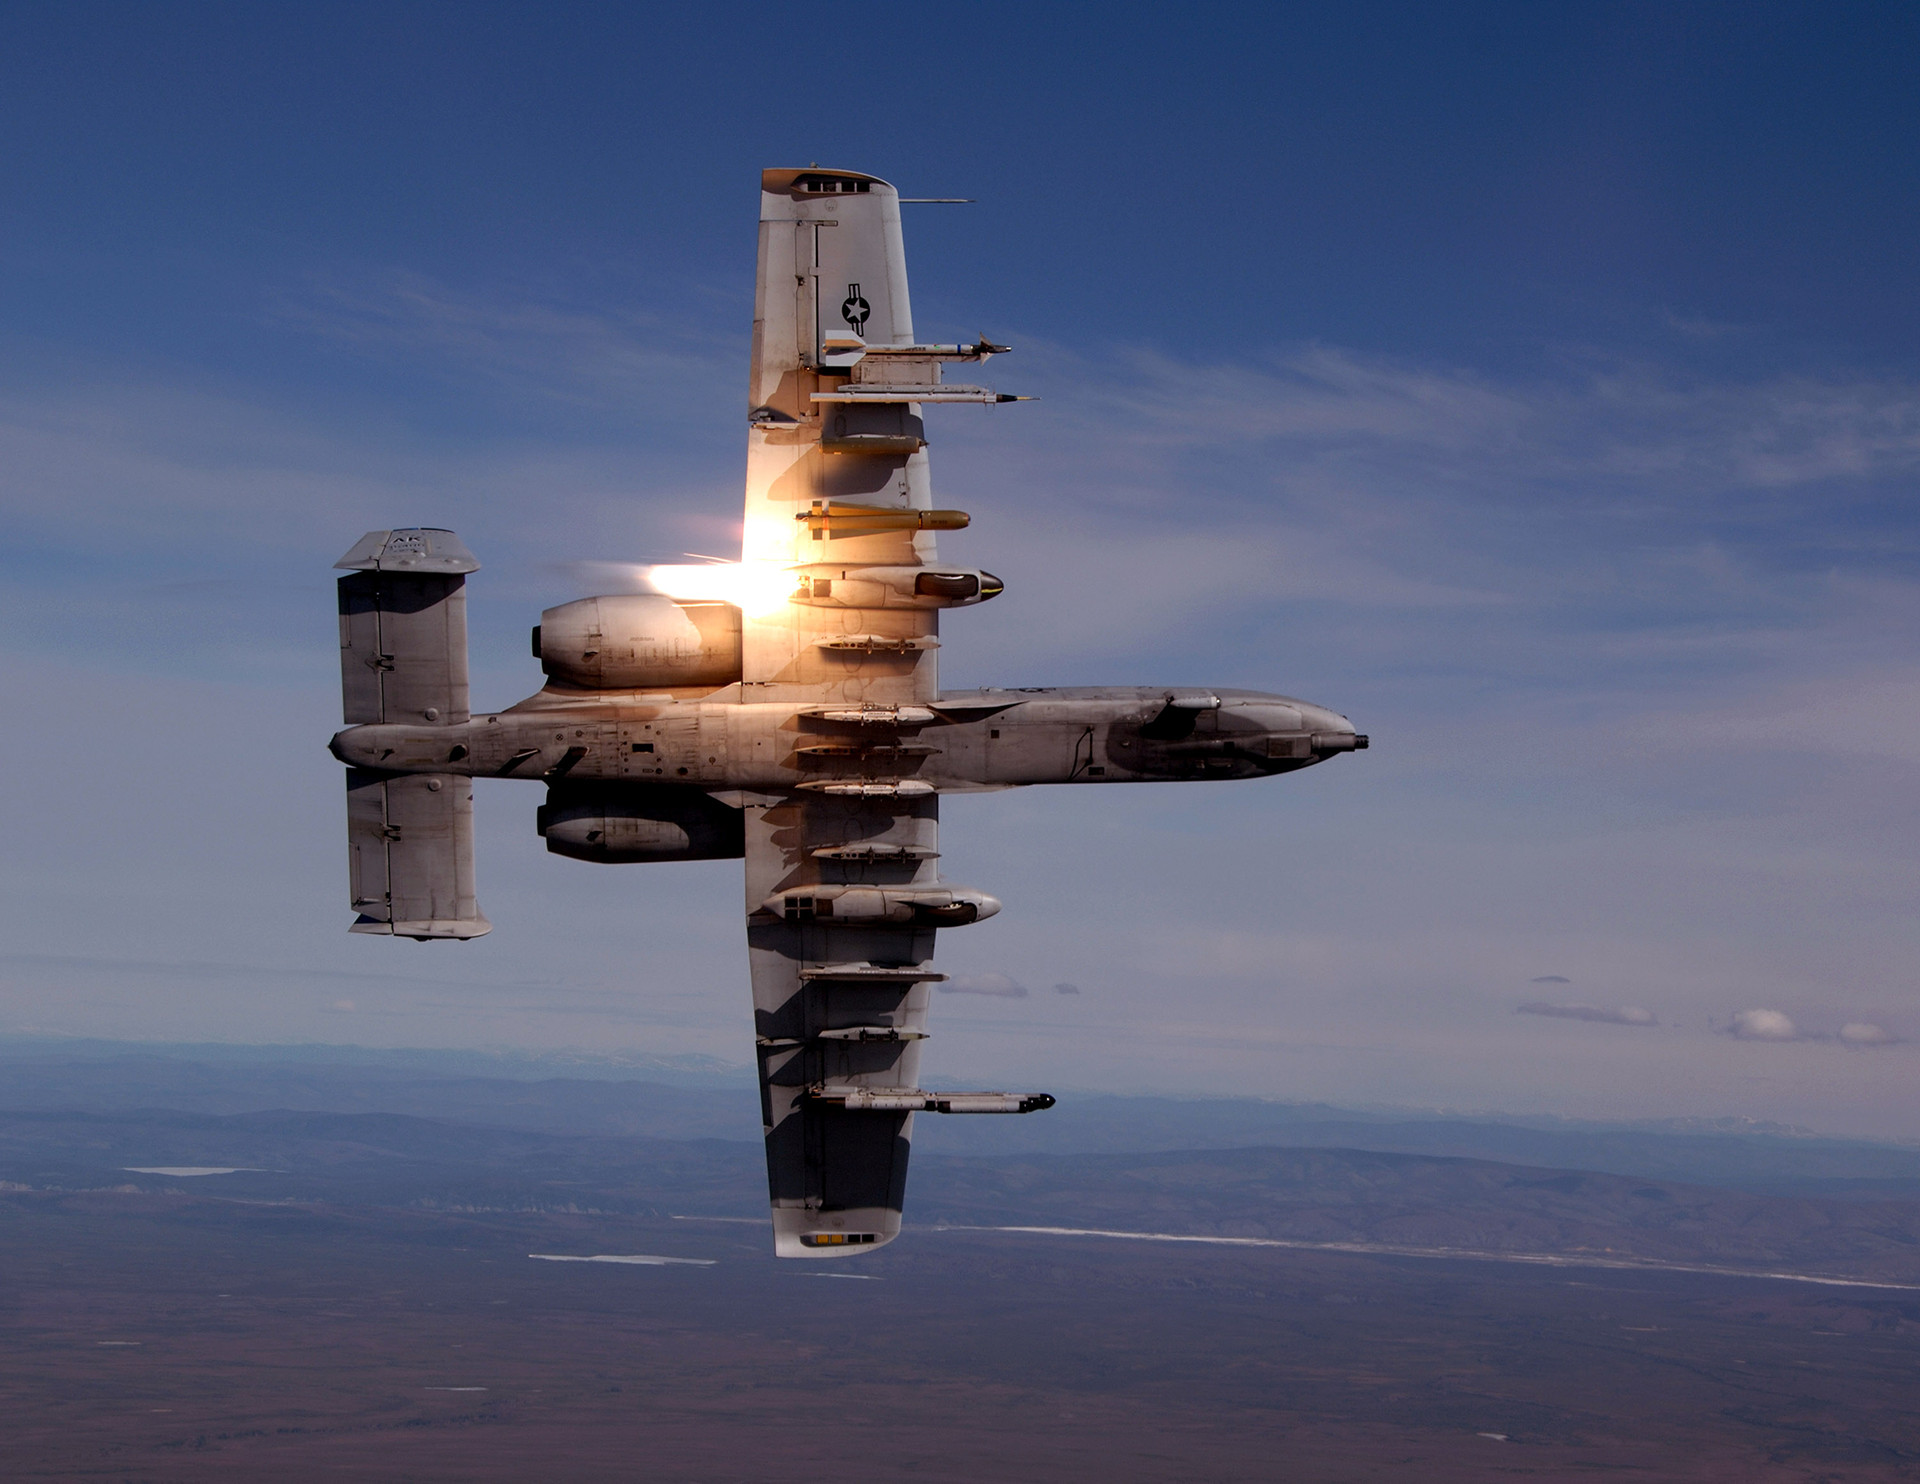 A-10C New wallpaper and menu music - updated directory 03172022